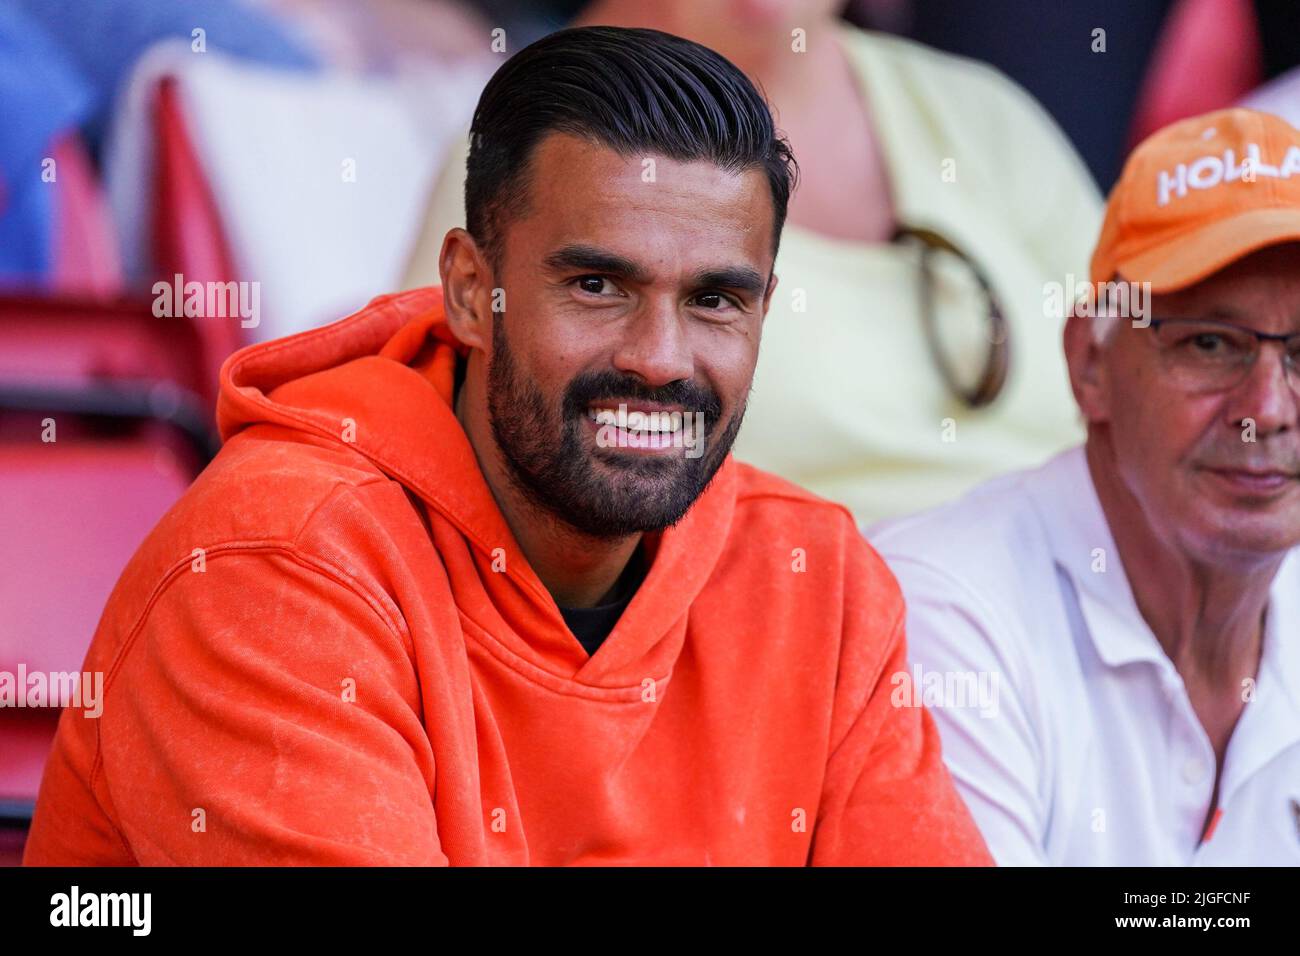 SHEFFIELD, UNITED KINGDOM - JULY 9: Benjamin van Leer of the Netherlands,  boyfriend of Lieke Martens of the Netherlands, watches from the stands  during the Group C - UEFA Women's EURO 2022